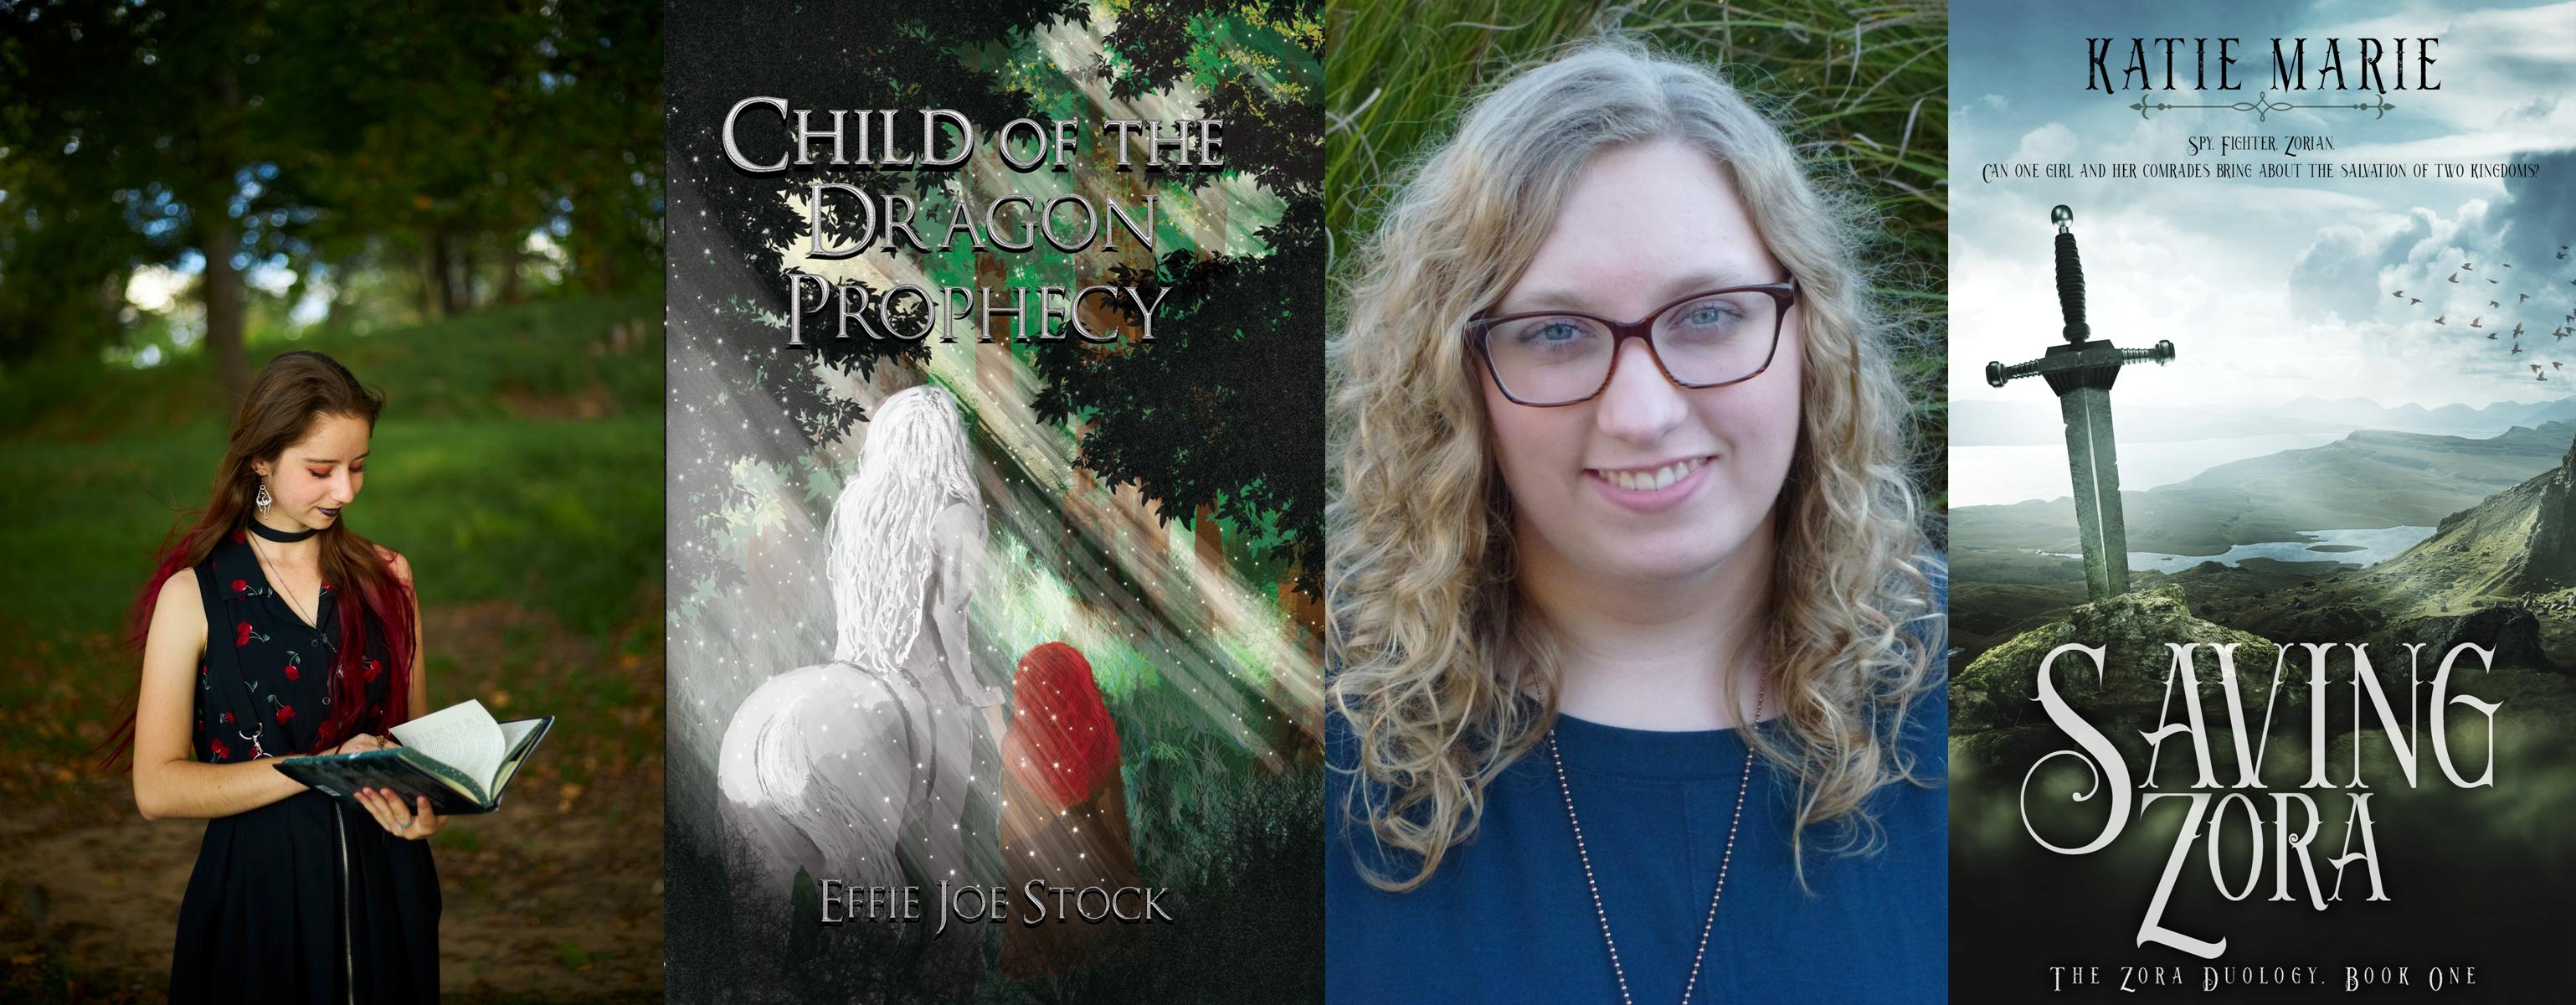 Effie Jo Stock and her book Child of the Dragon Prophecy and Katie Marie and her book Saving Zora